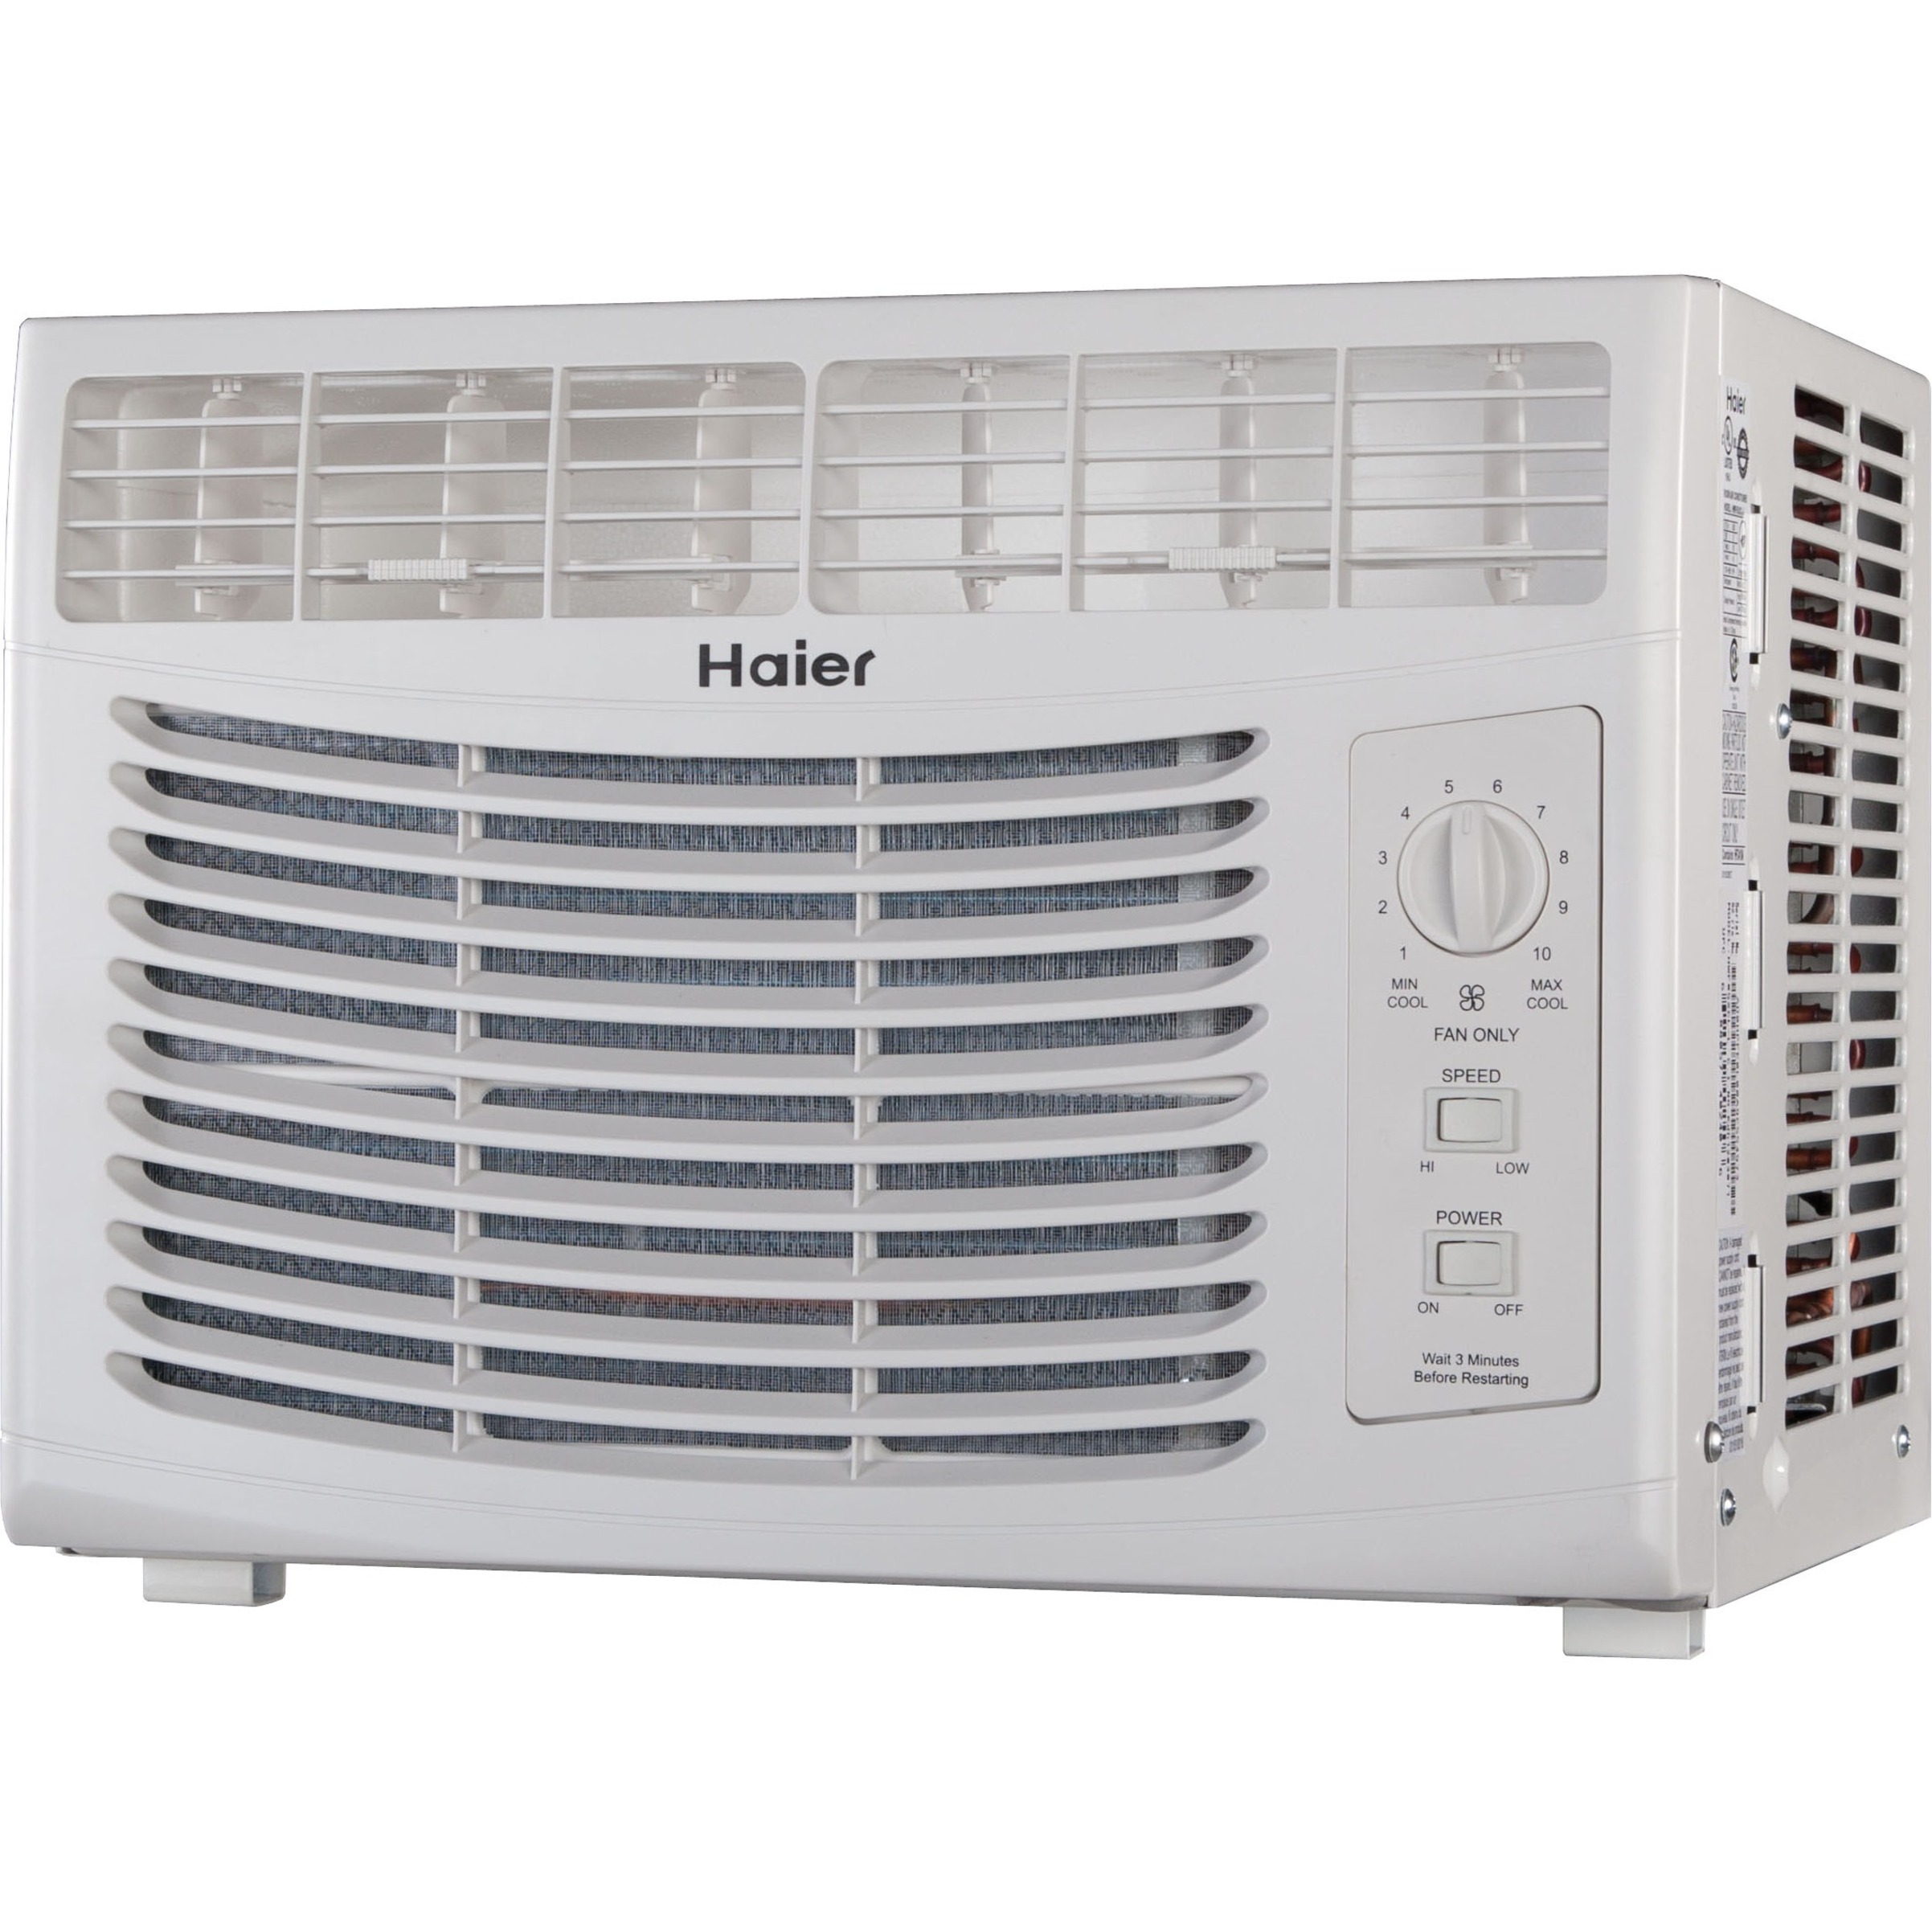 Haier HWF05XCL-L 5,000 BTU 115V Window-Mounted Air Conditioner with Mechanical Controls - image 3 of 5